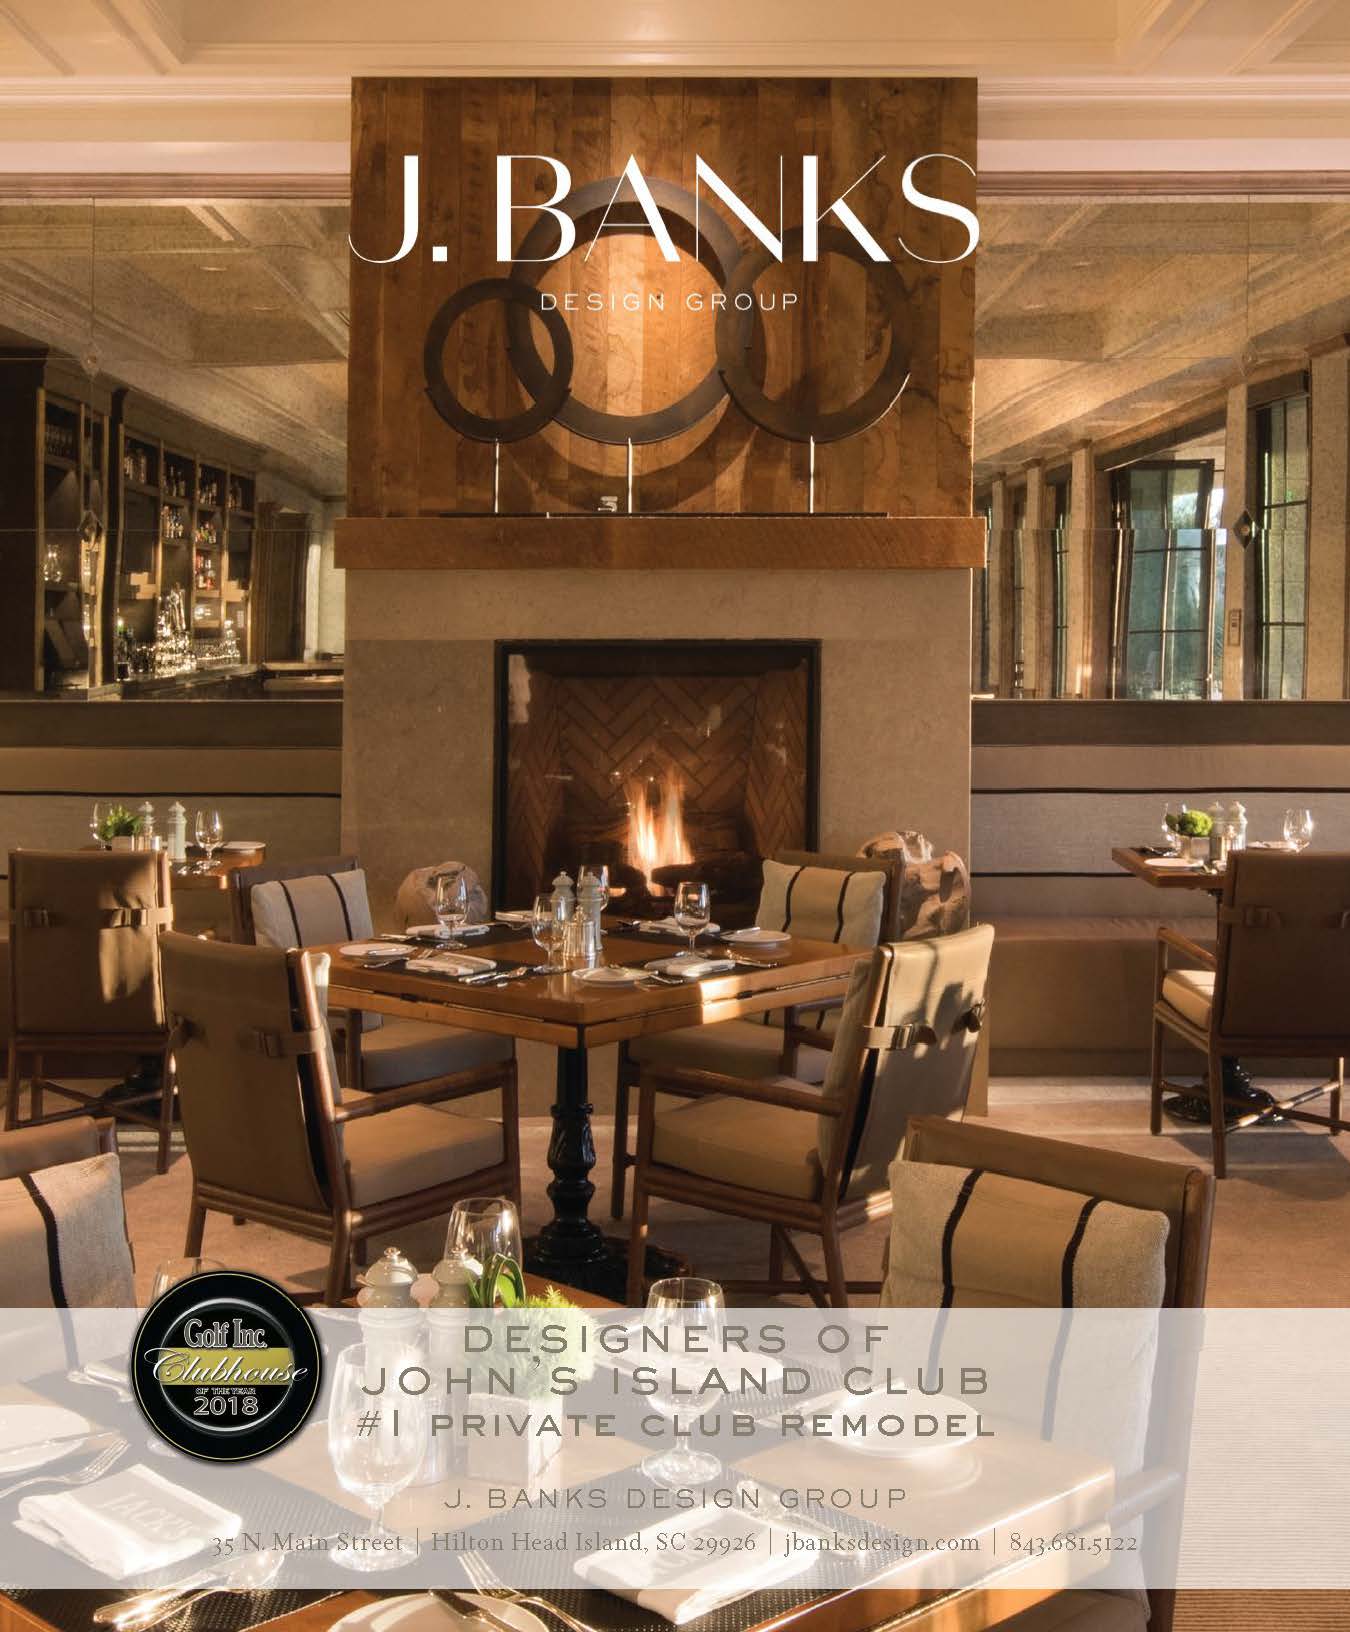 Golf Inc Private Club Remodel Award given to j banks design group for johns island club